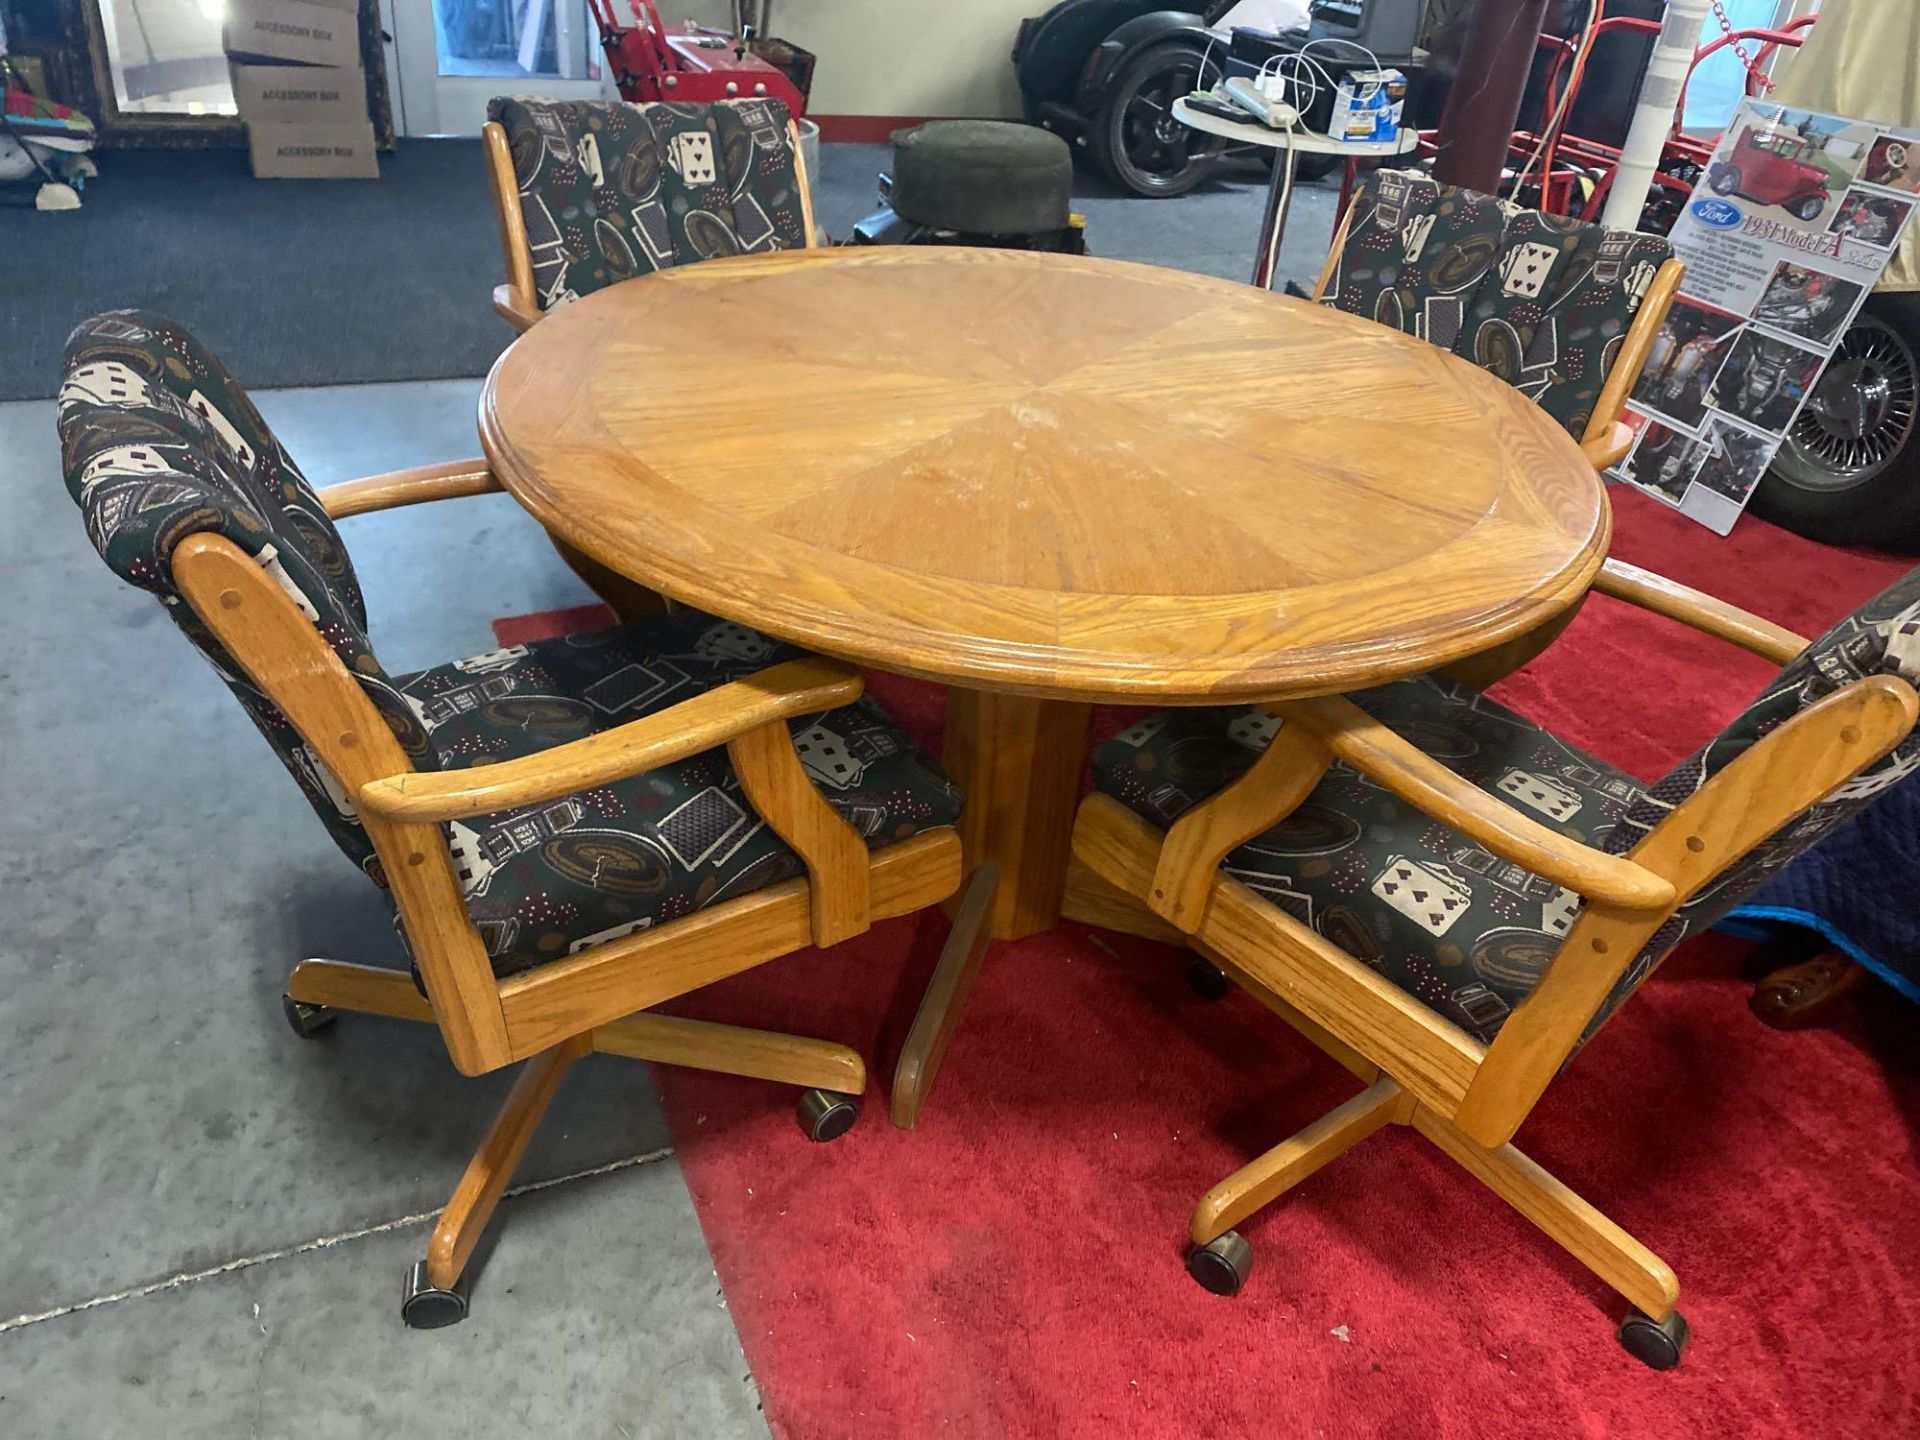 OAK WOOD POKER TABLE WITH REVERSIBLE TABLE TOP, 4 ROLLING CHAIRS ALSO INCLUDED - Image 6 of 8